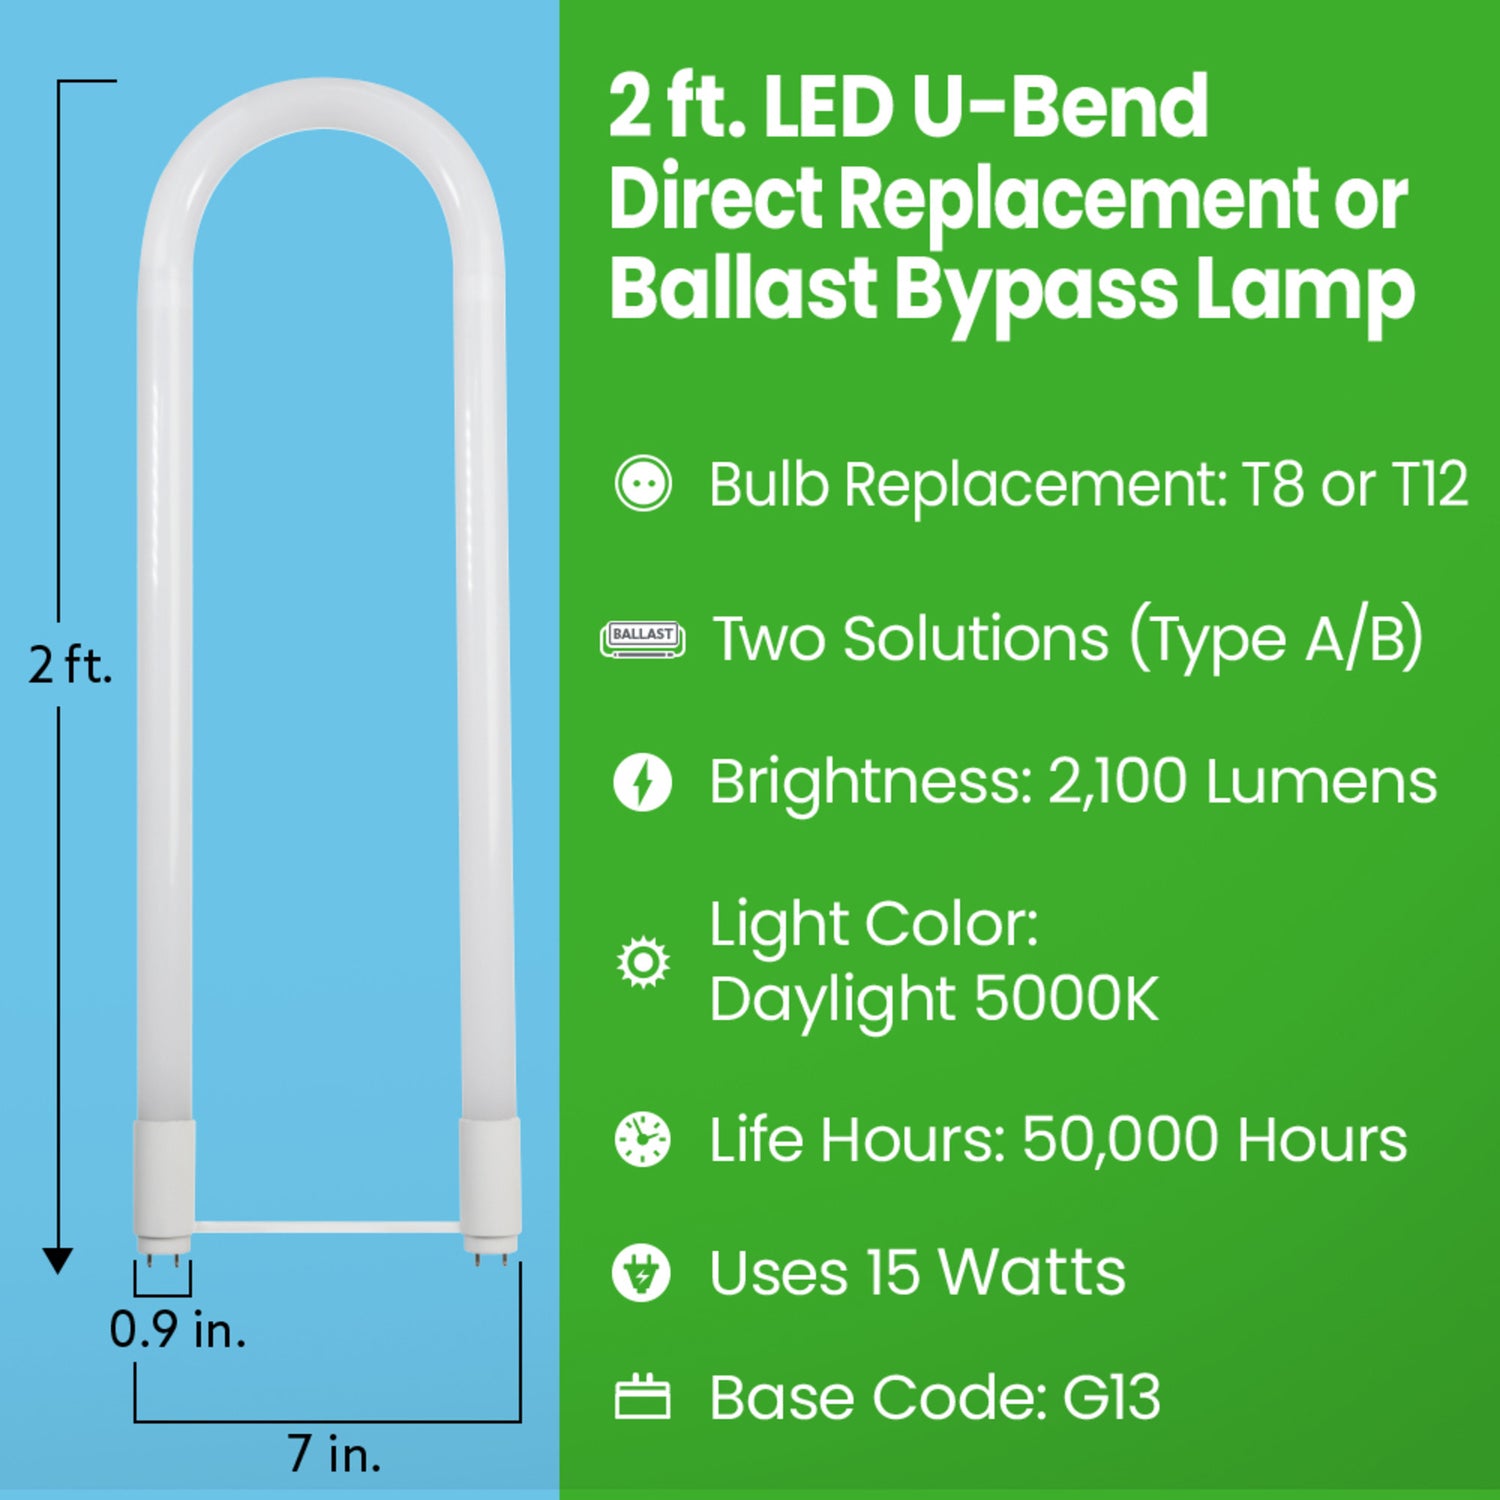 6 in. 15W (32W Replacement) Daylight (5000K) G13 Base (T8 and T12 Replacement) Direct Replacement and Ballast Bypass (Type AB) U-Bend Linear LED Tube